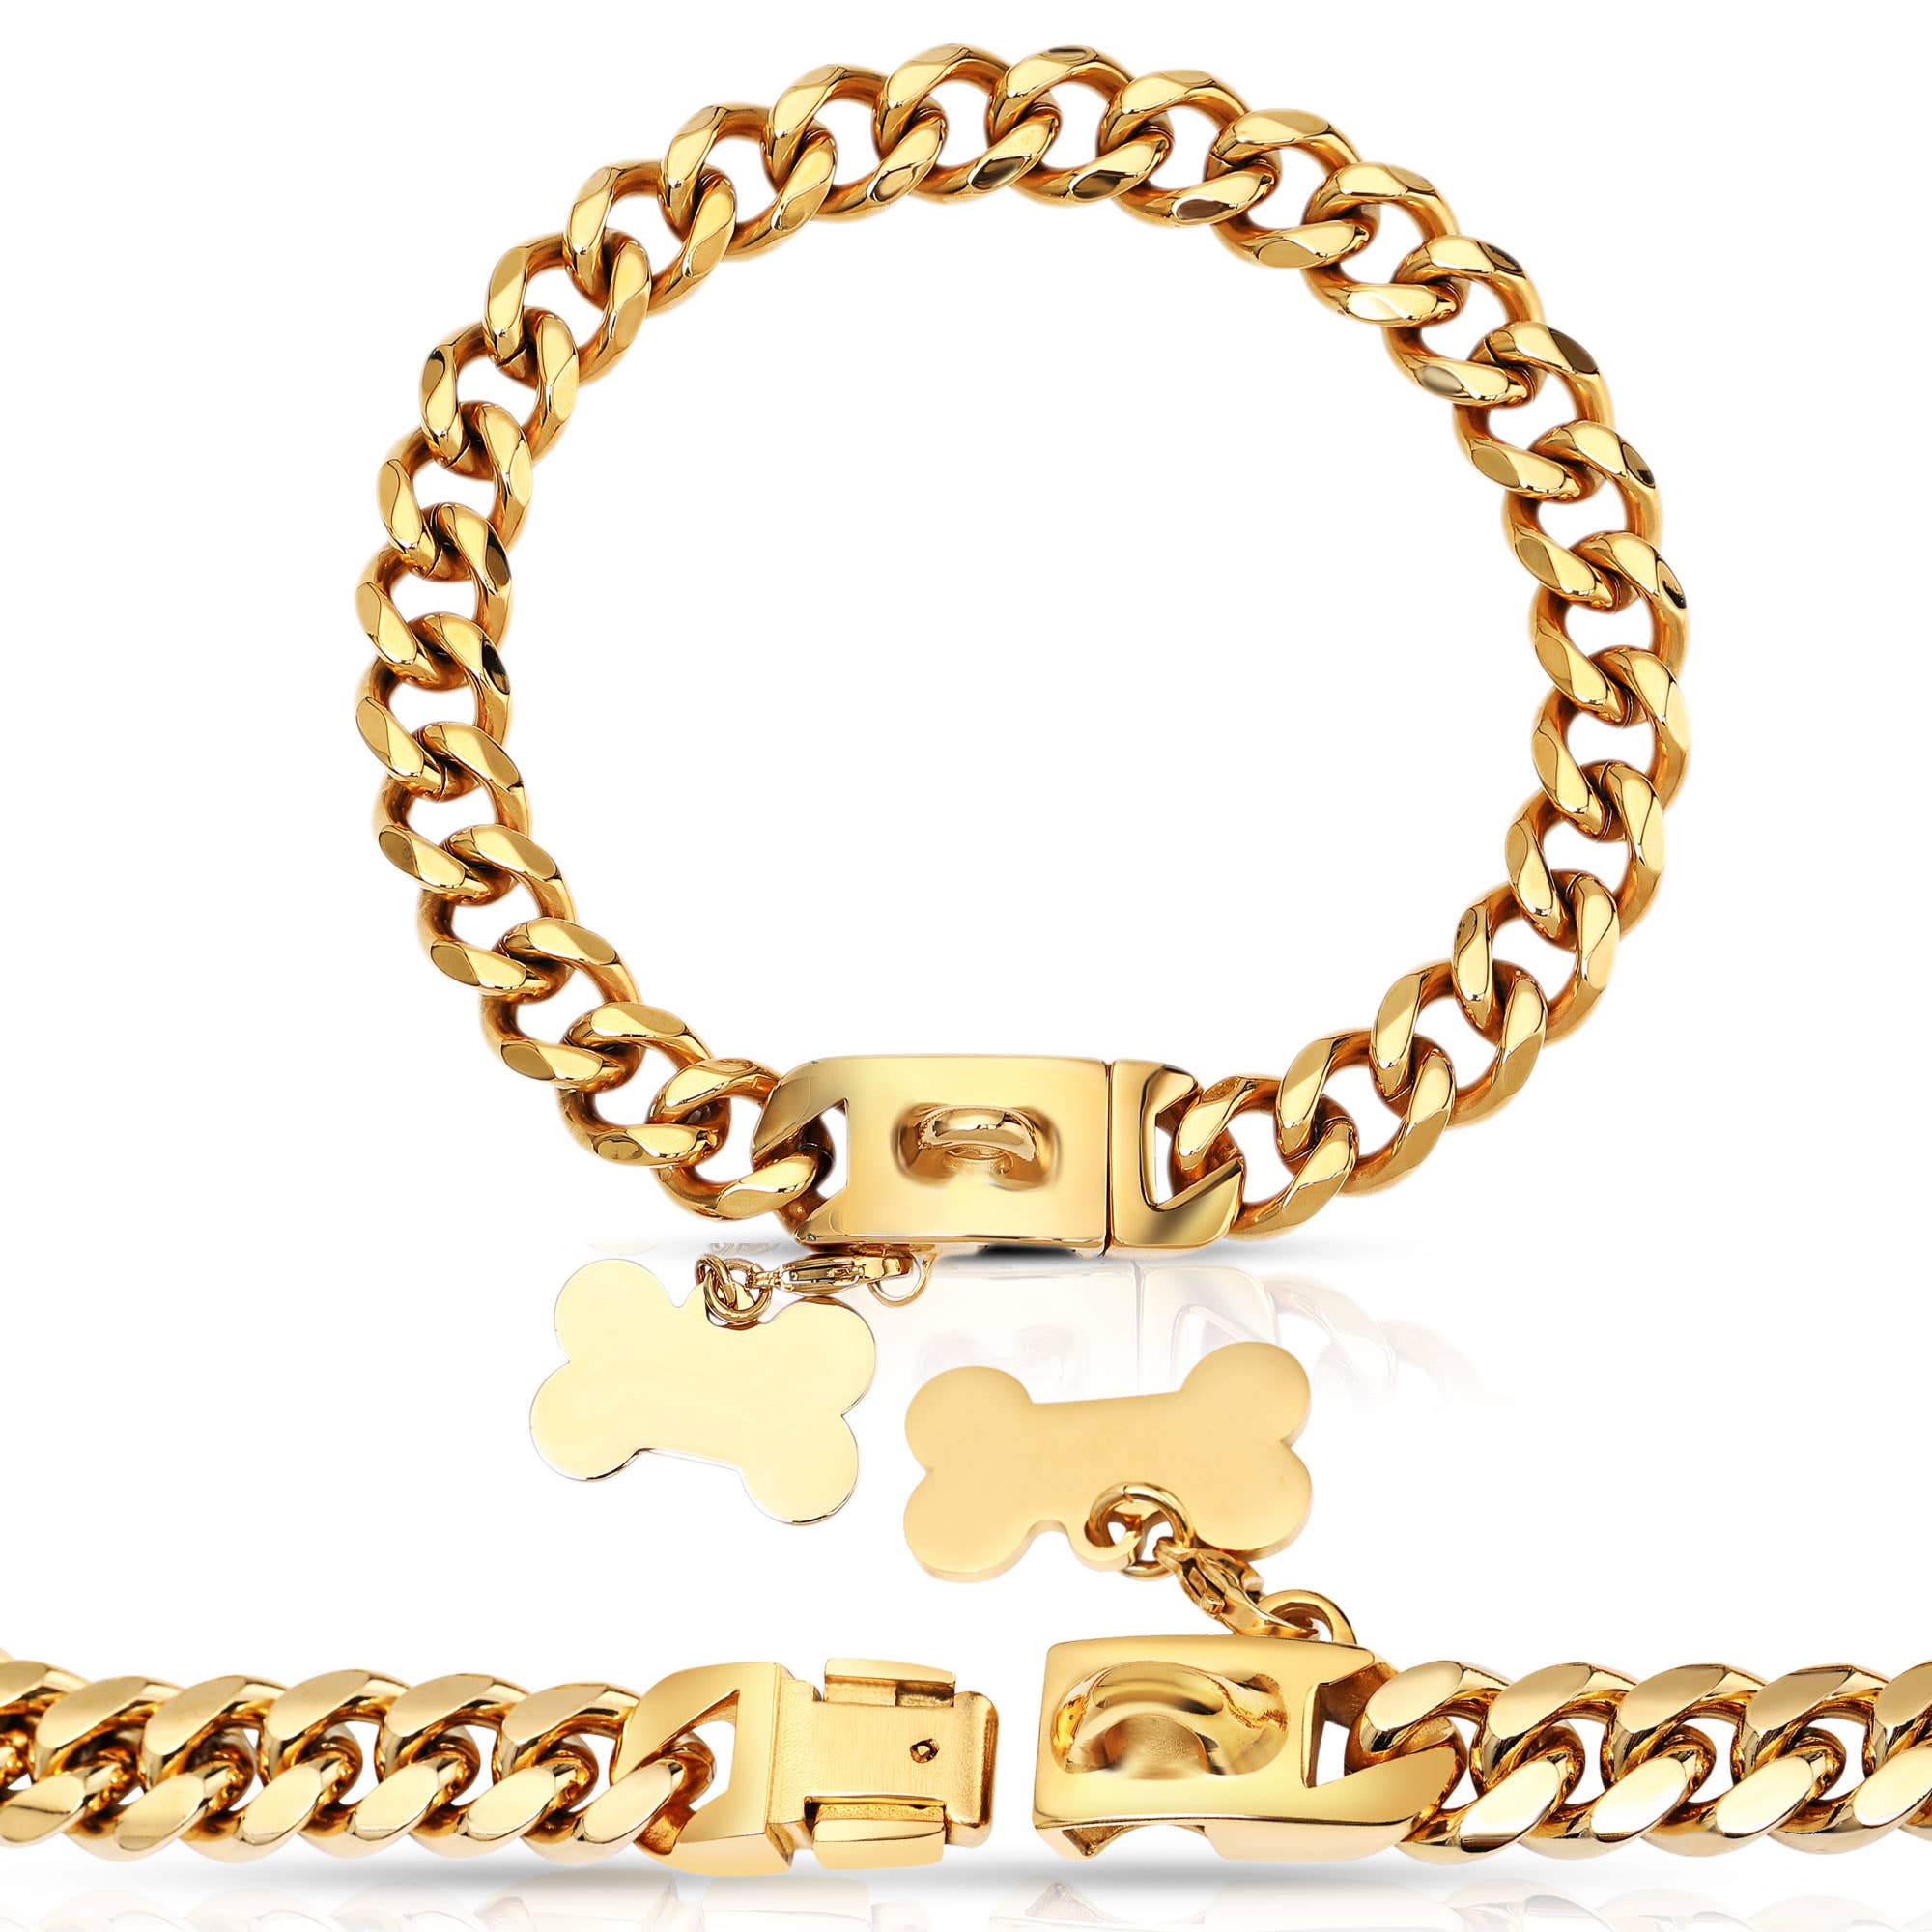 Vudeco Tarvos Gold Chain Dog Collar with Secure Snap Buckle - 19mm